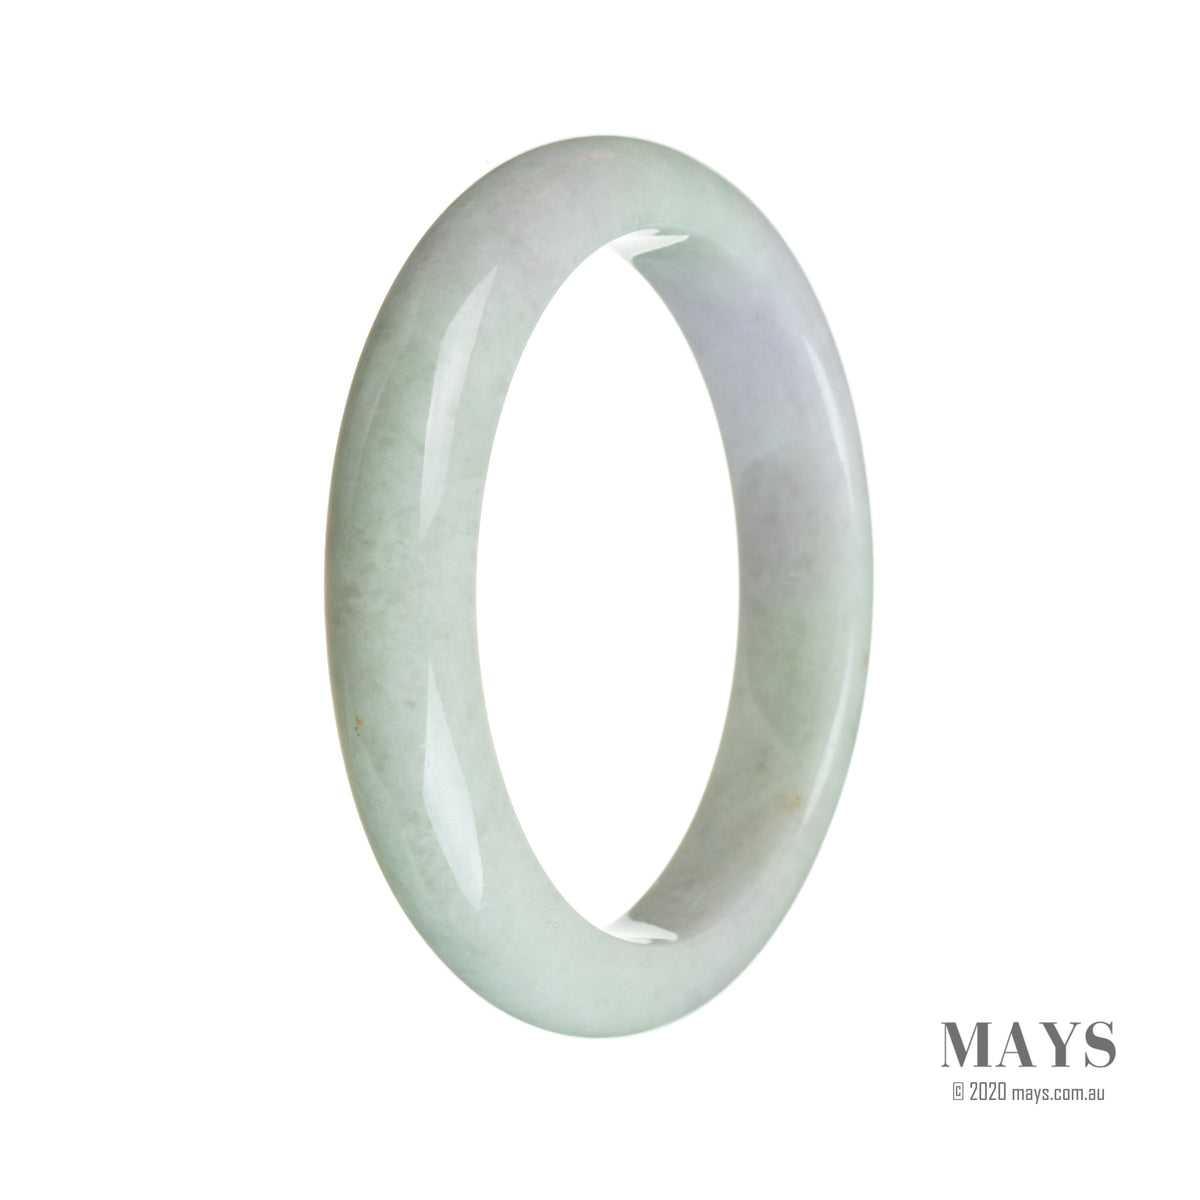 A close-up image of a 58mm semi-round lavender jade bangle. The bangle is certified as natural and features a vibrant green color with hints of lavender. It is a stylish and elegant piece of jewelry from the brand MAYS.